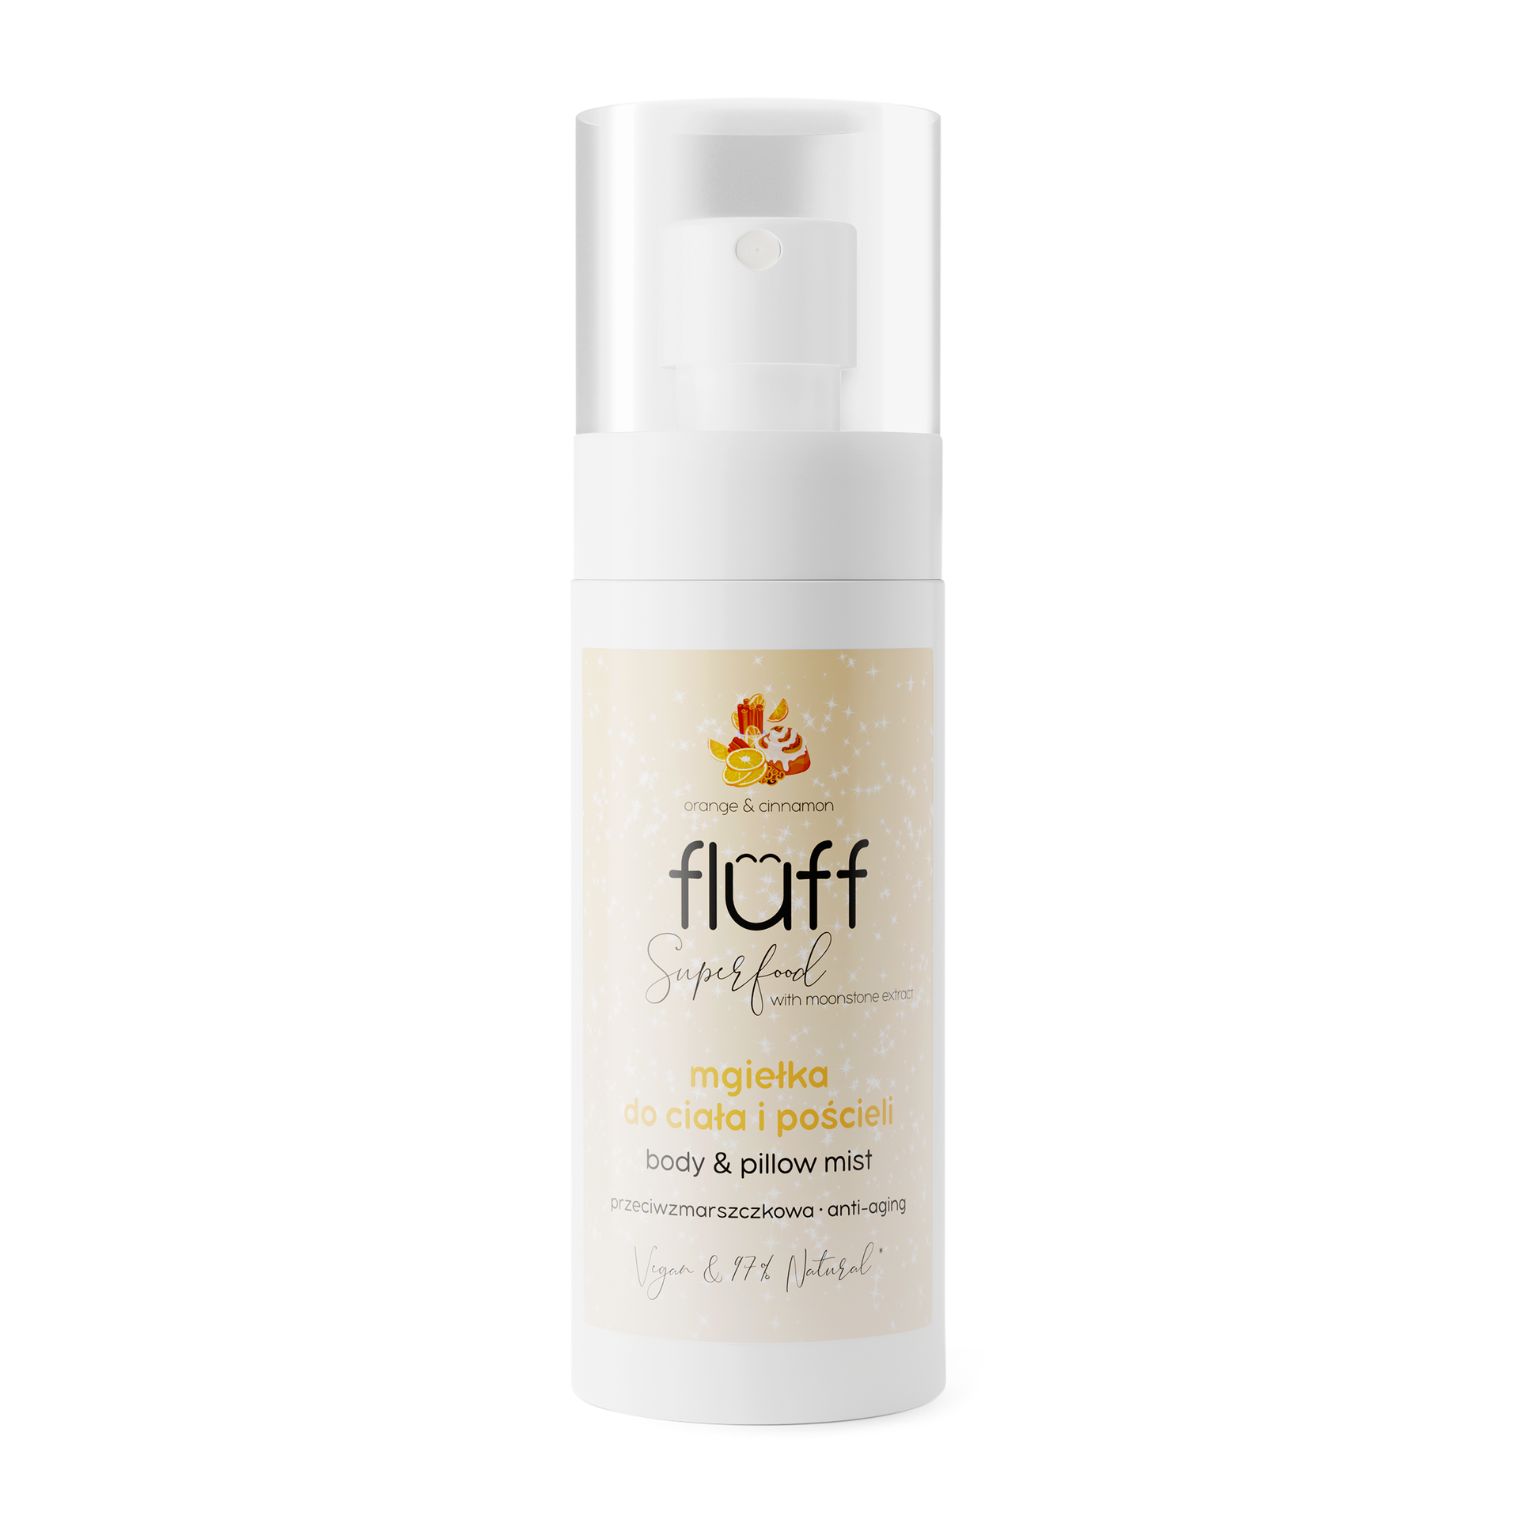 Fluff Cozy Evening Limited Edition Pillow Mist 100ml